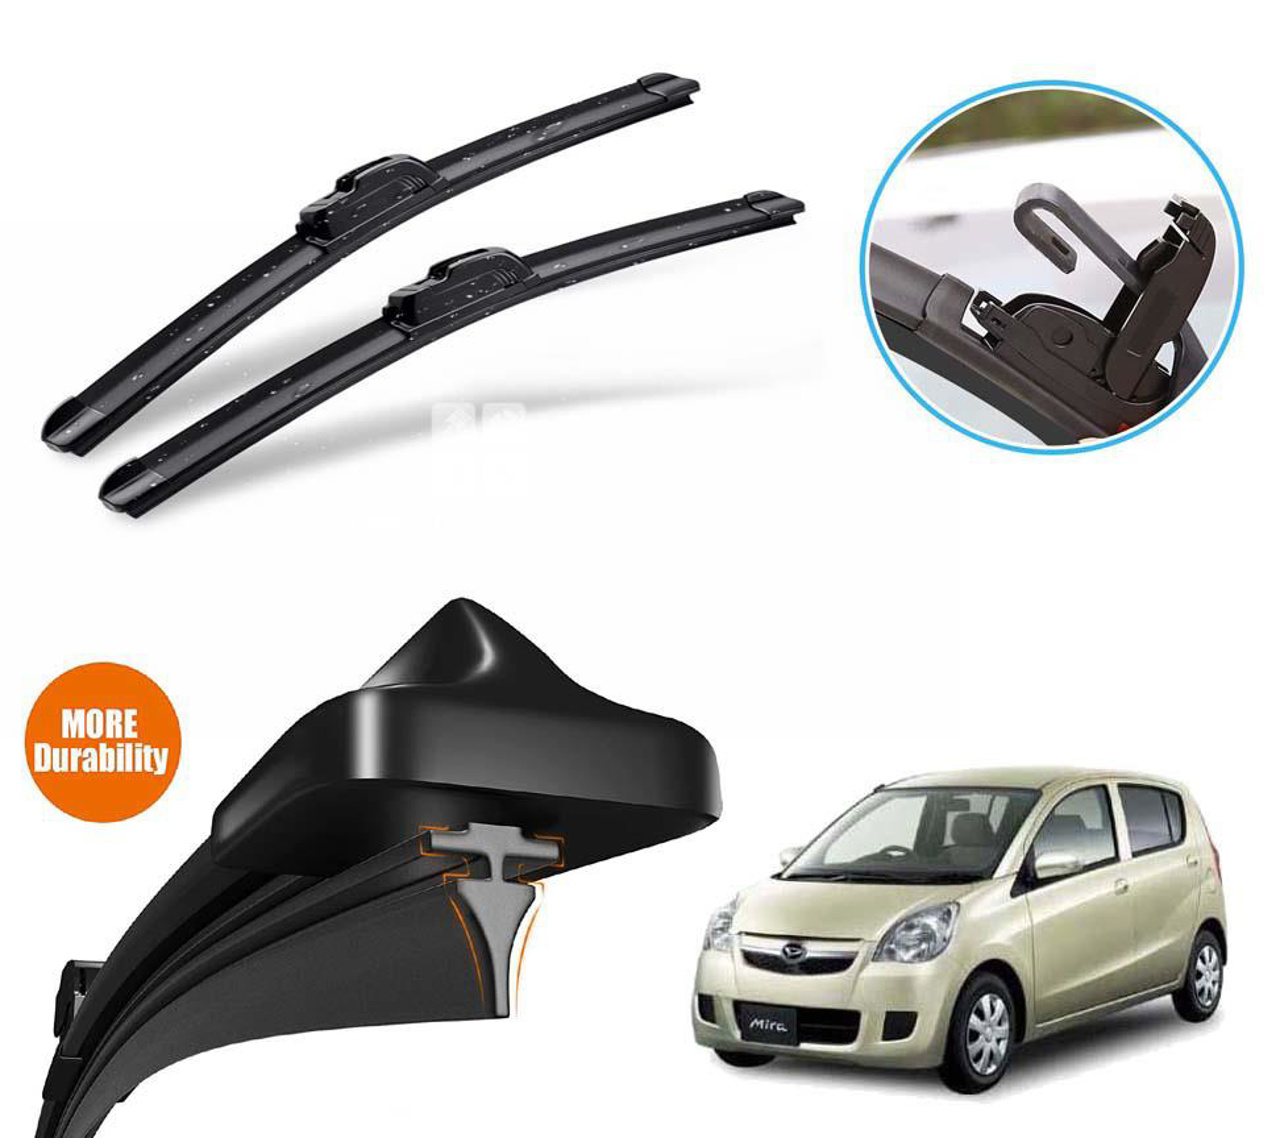 Picture of Daihatsu Mira Silicone Wiper Blades | Soft Rubber Vipers | High Quality Graphite Coated Rubber | Non Cracking Material